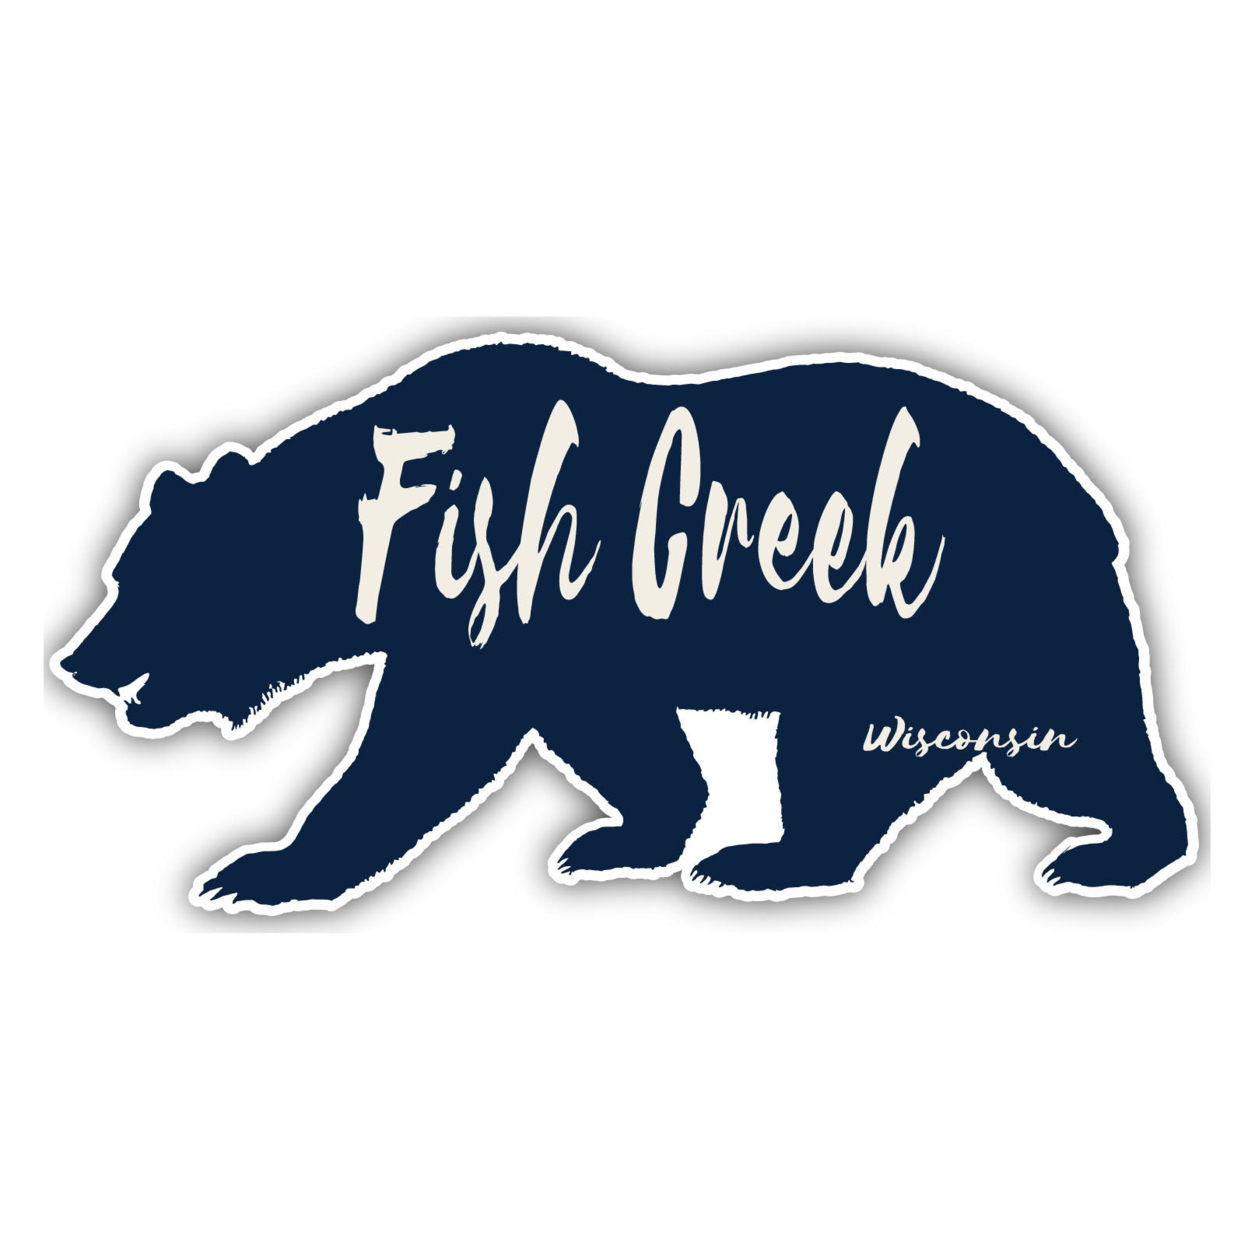 Fish Creek Wisconsin Souvenir Decorative Stickers (Choose Theme And Size) - 4-Pack, 10-Inch, Bear